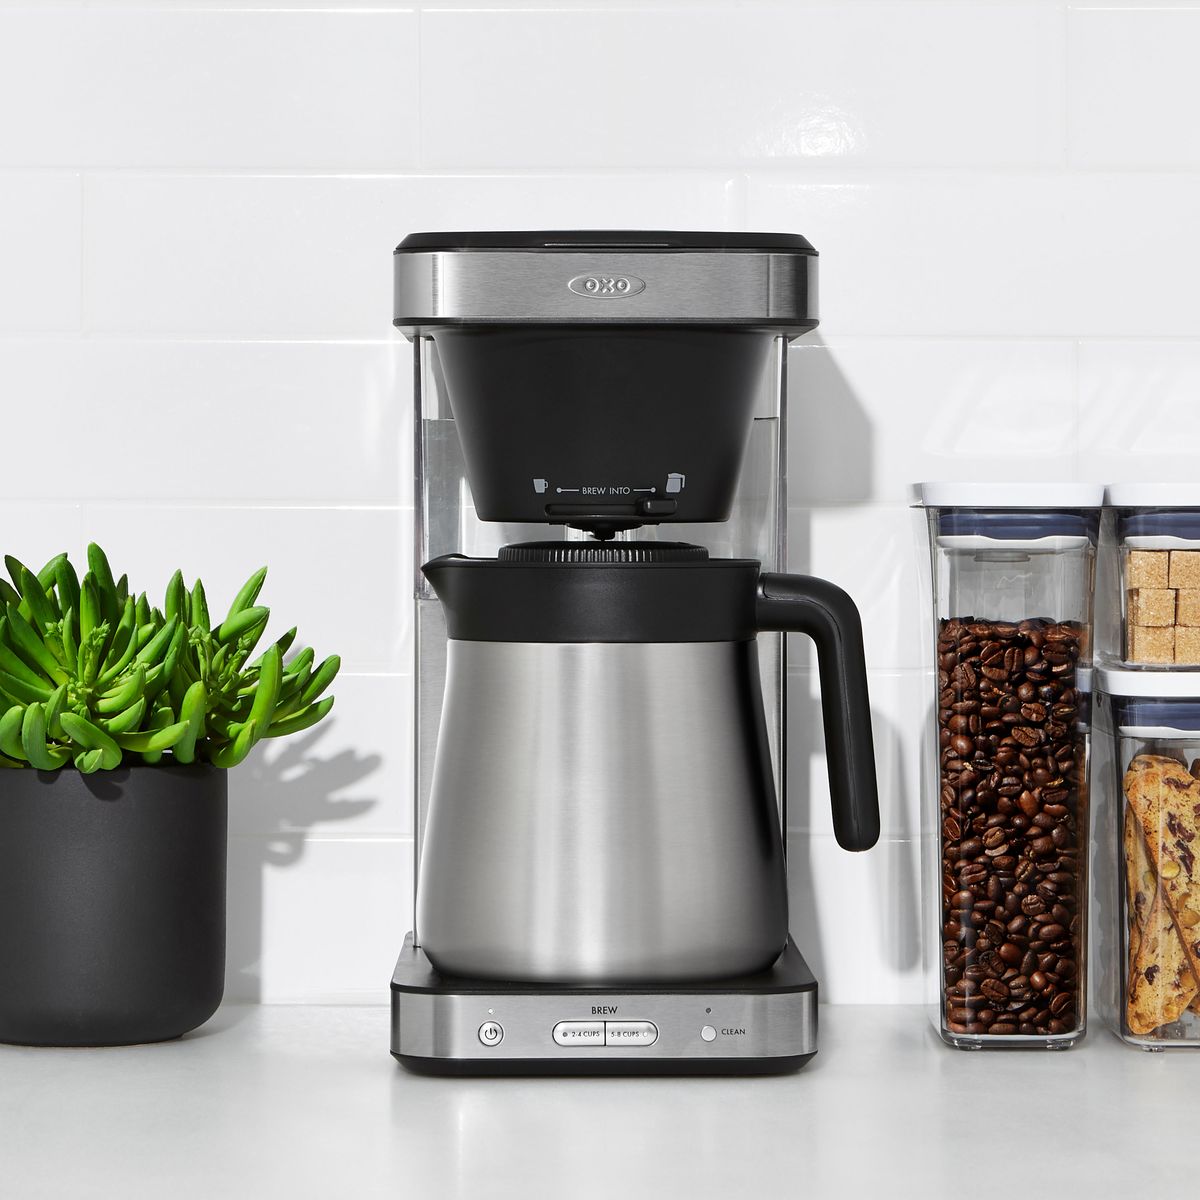 OXO 8 Cup Coffee Maker - Quick Look 